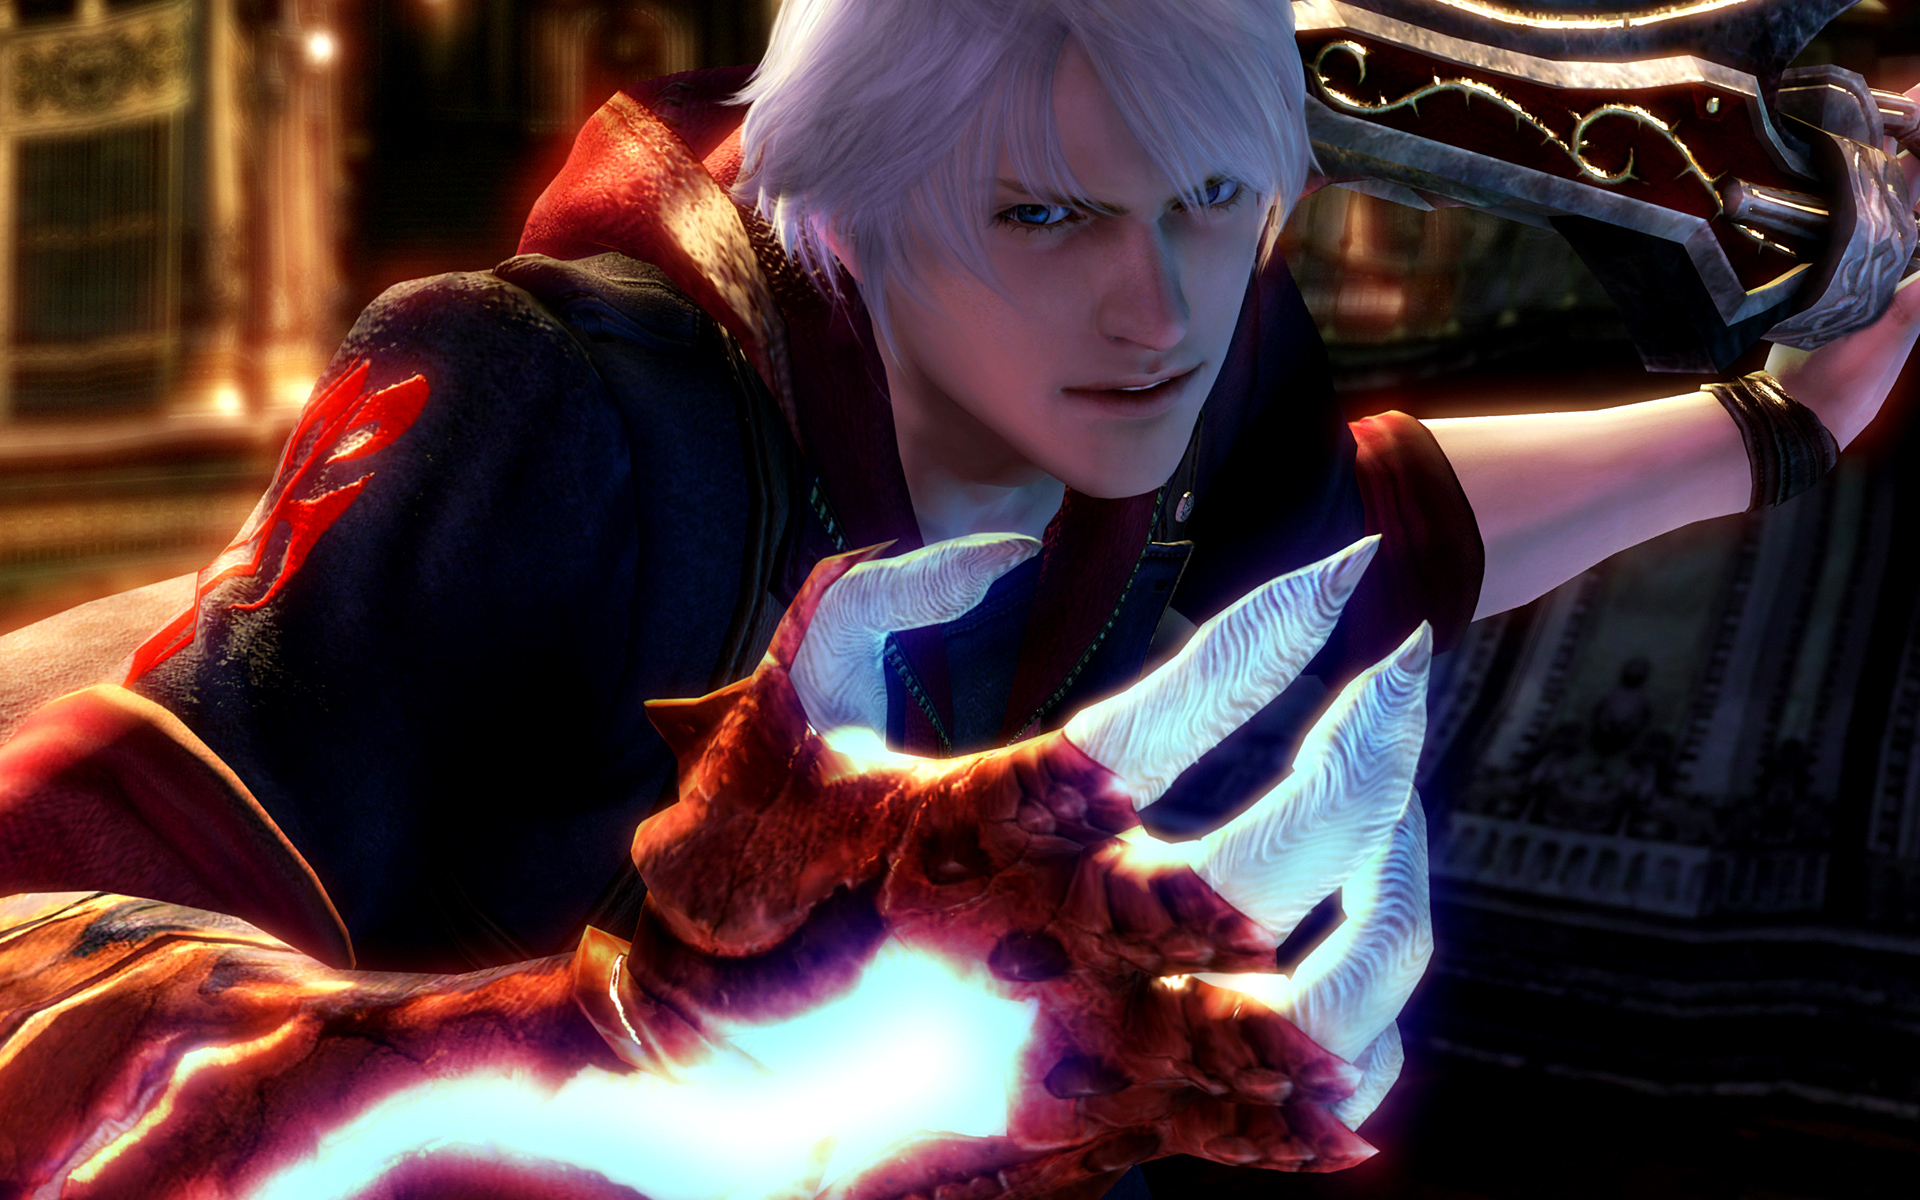 Nero from Devil May Cry in high definition desktop wallpaper.